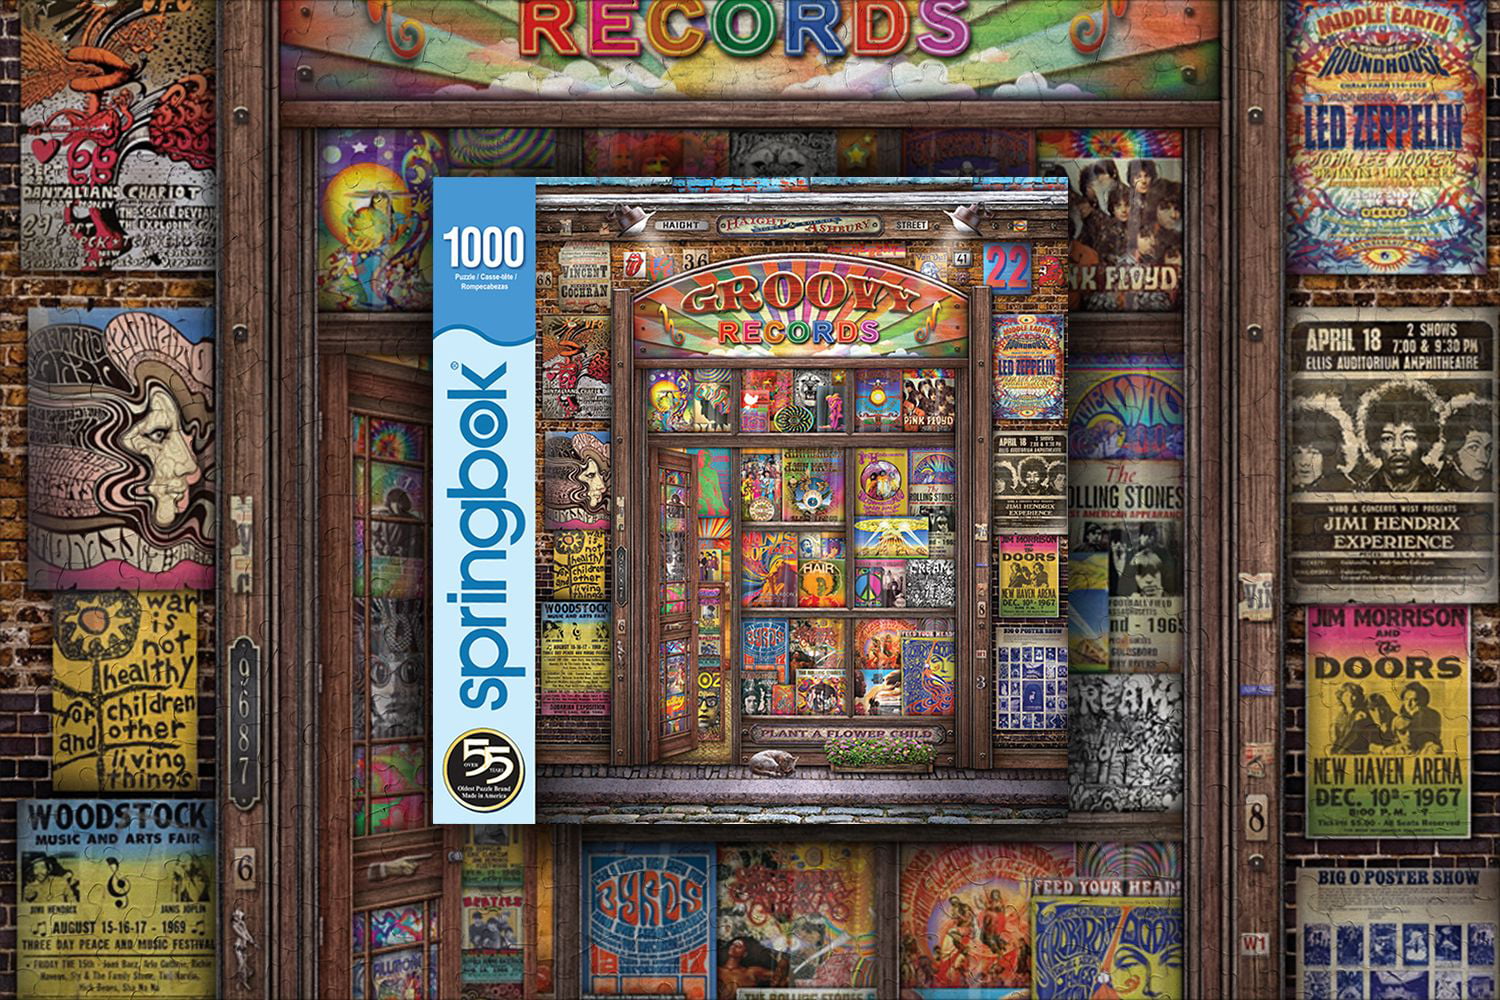 Springbok Puzzles Groovy Records Jigsaw Puzzle 1000 Made in The USA for sale online 